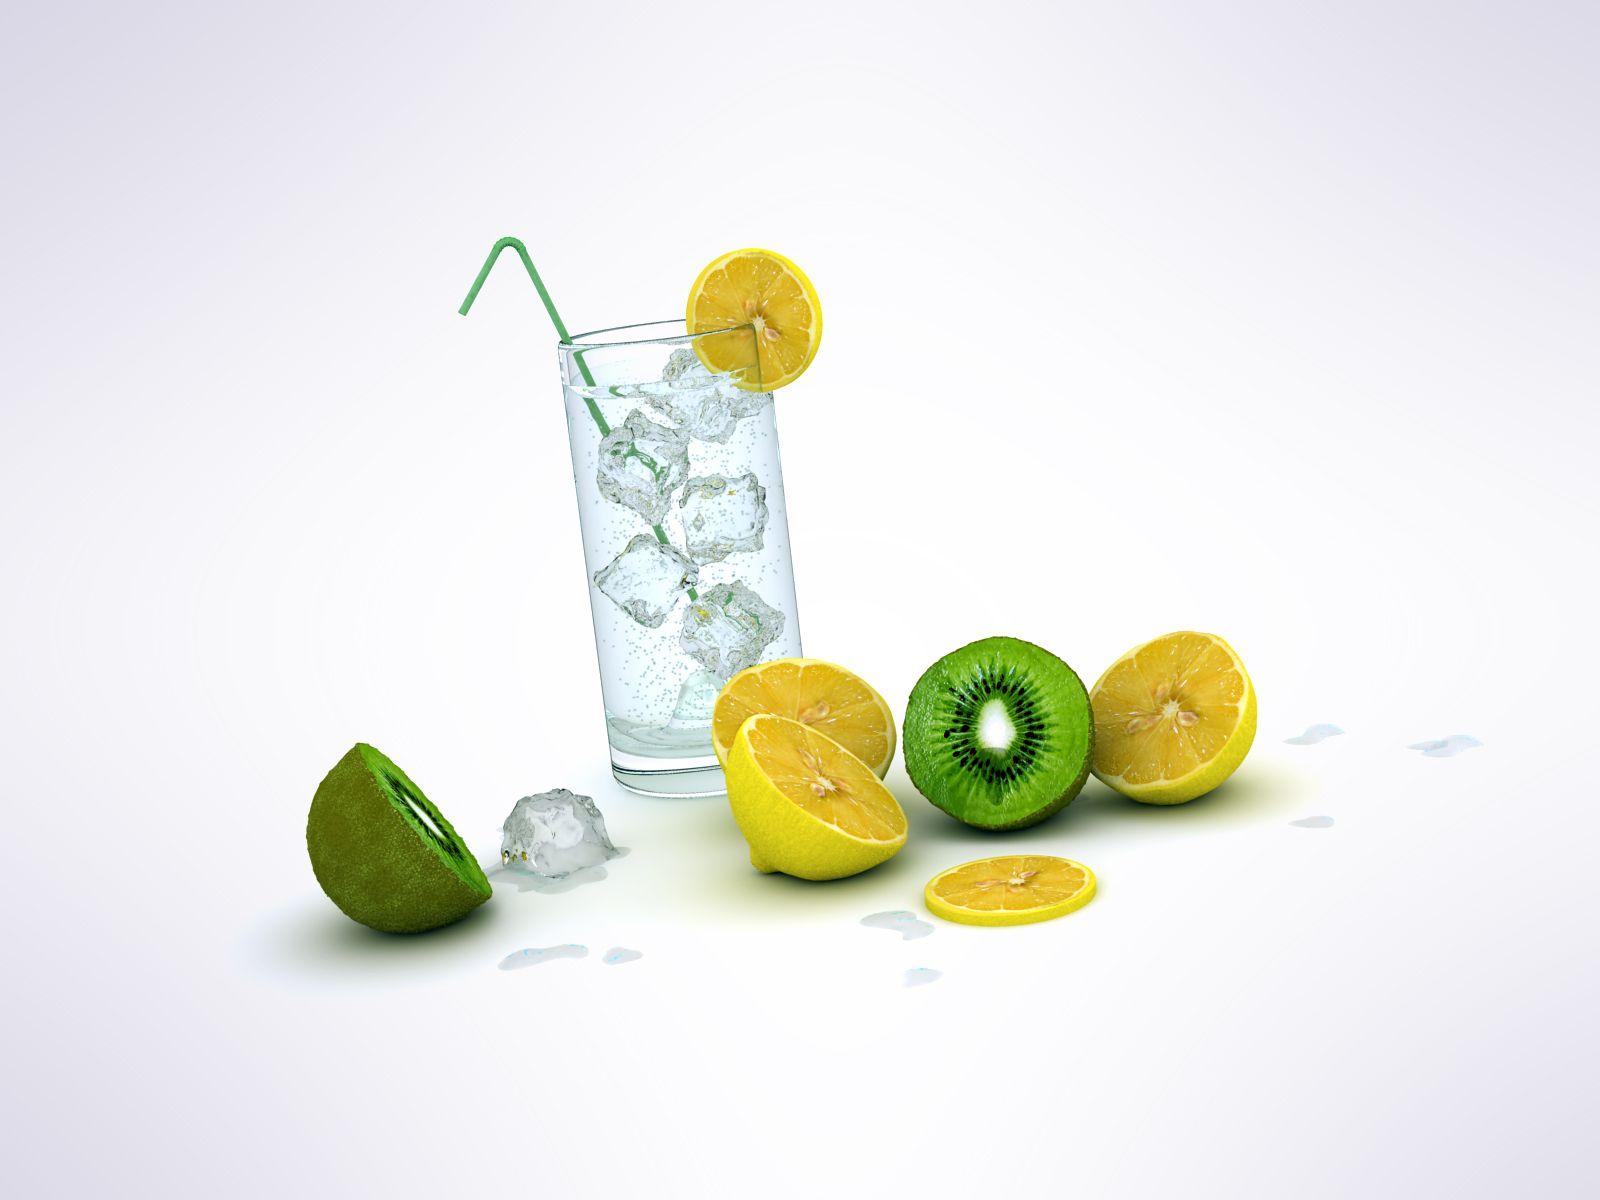 Lemonade wallpaper and image, picture, photo